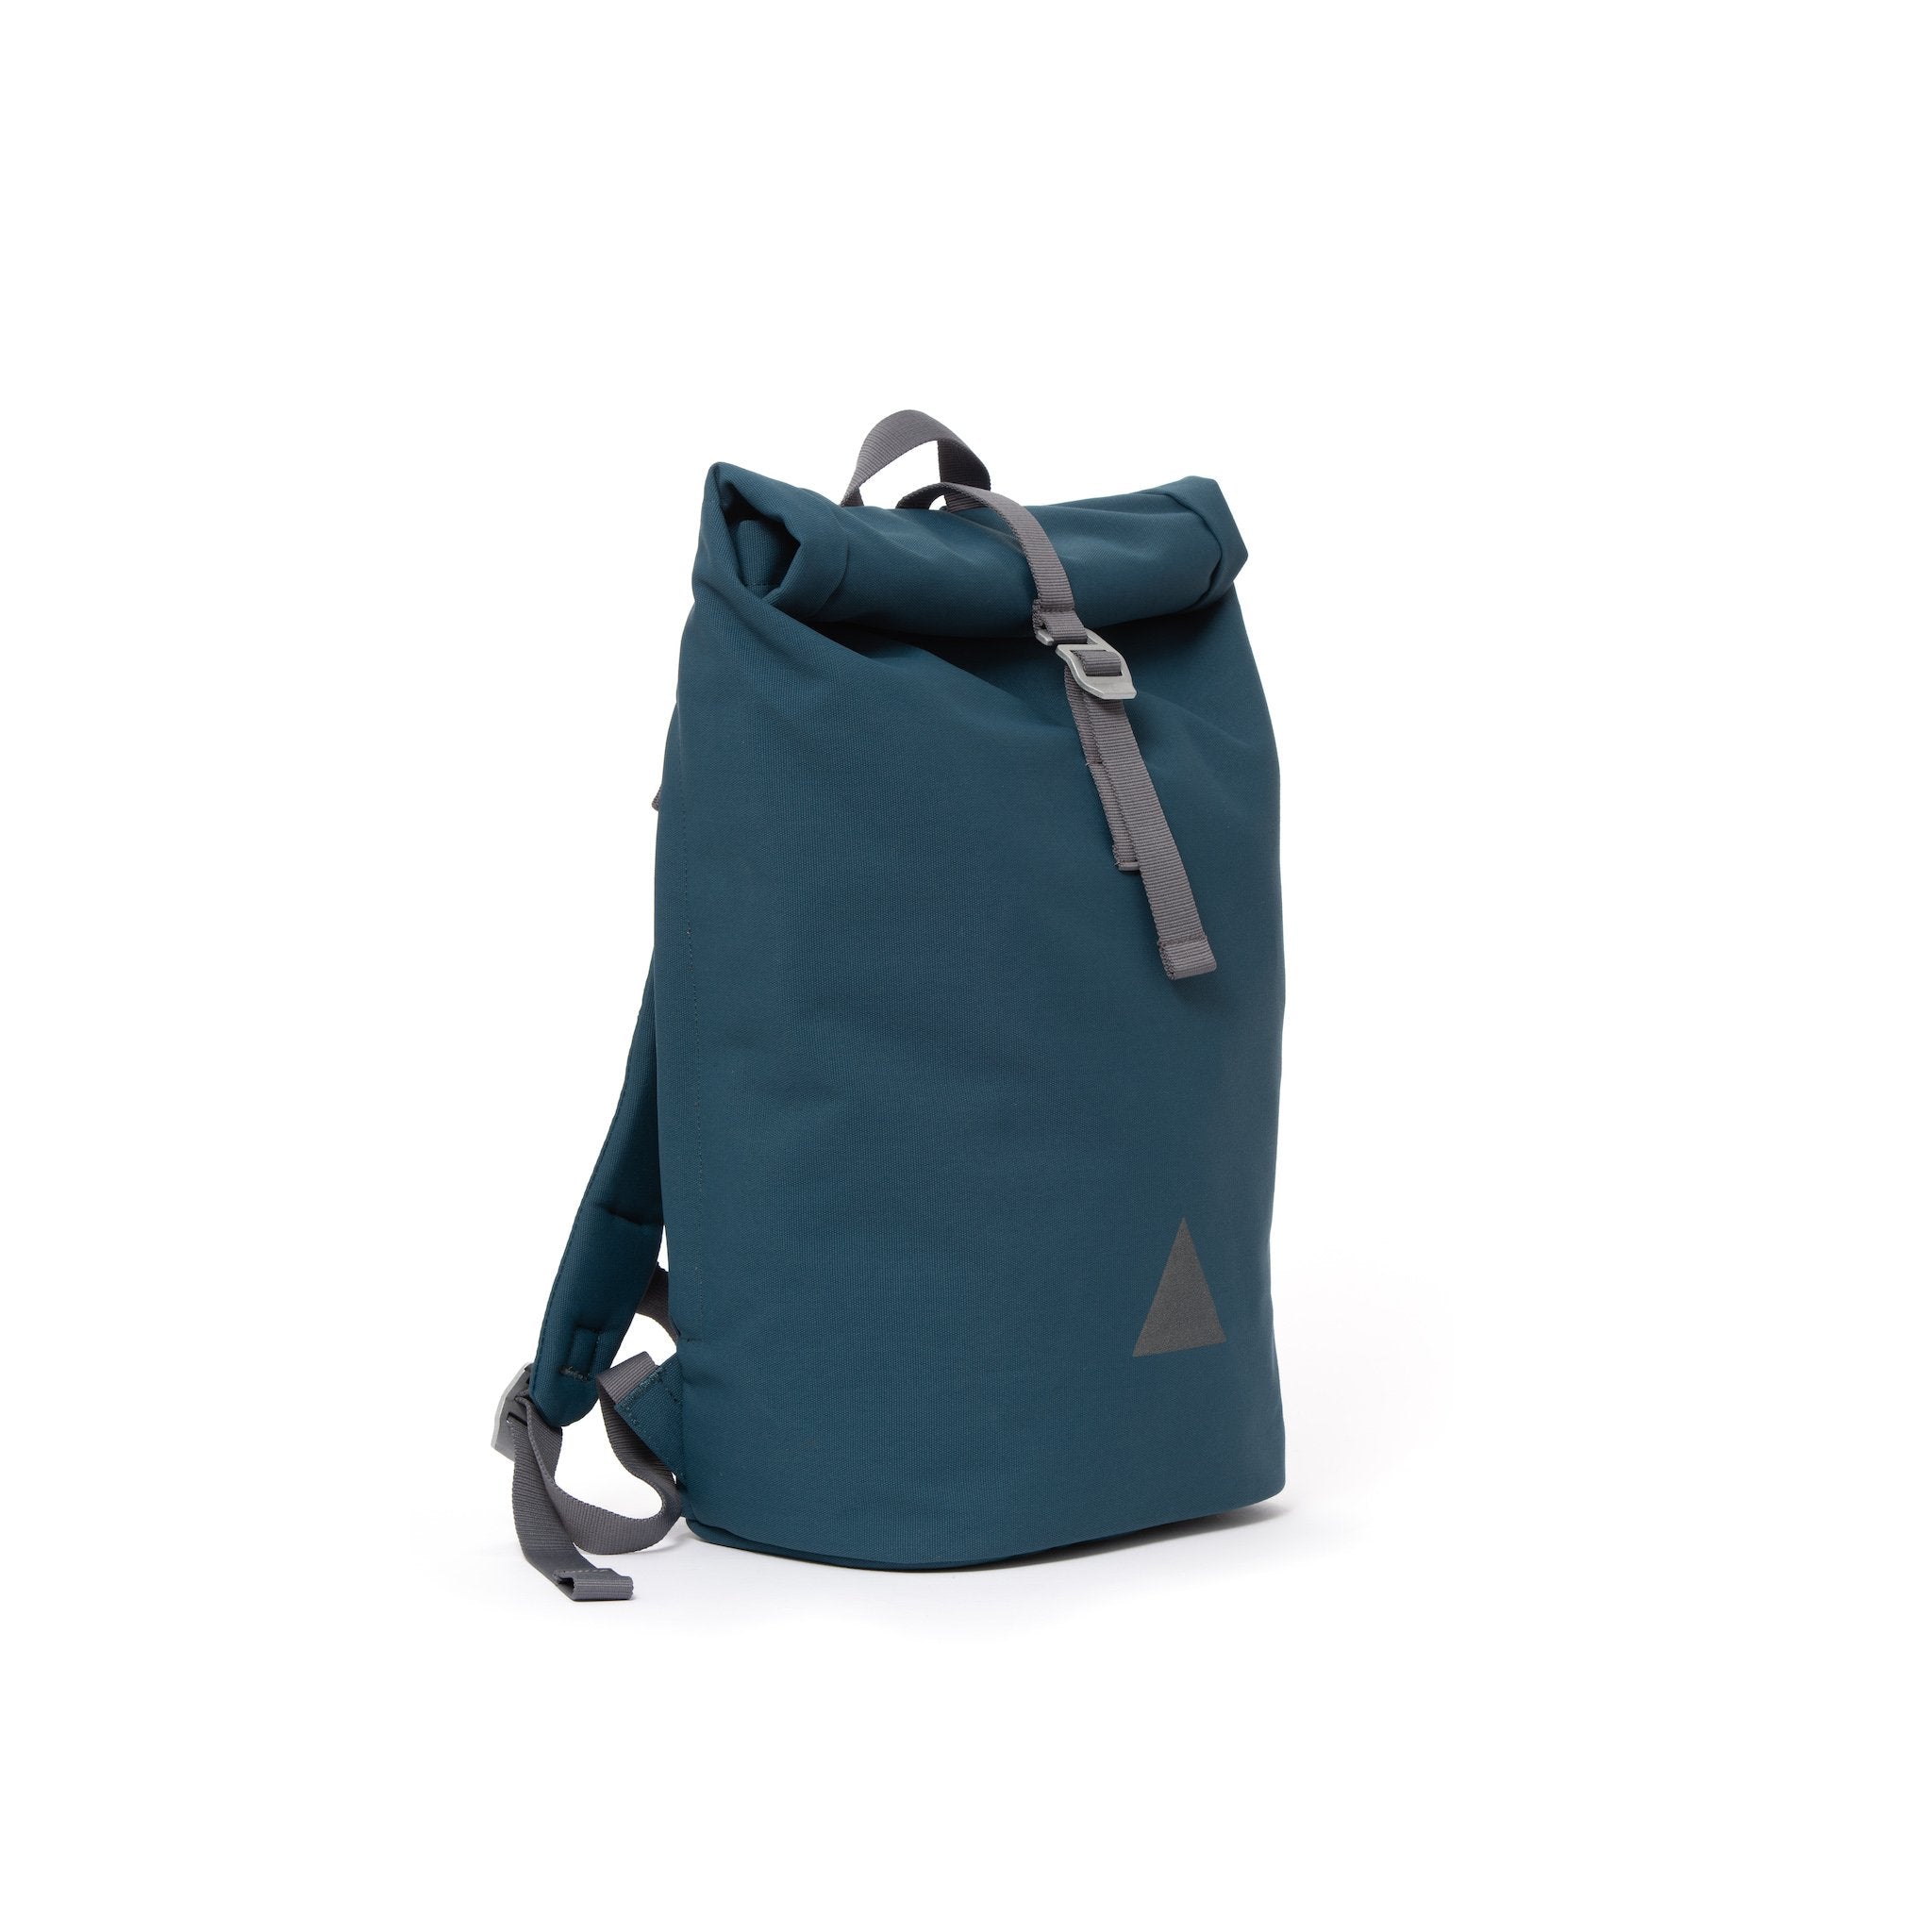 Blue recycled canvas men’s rolltop backpack.